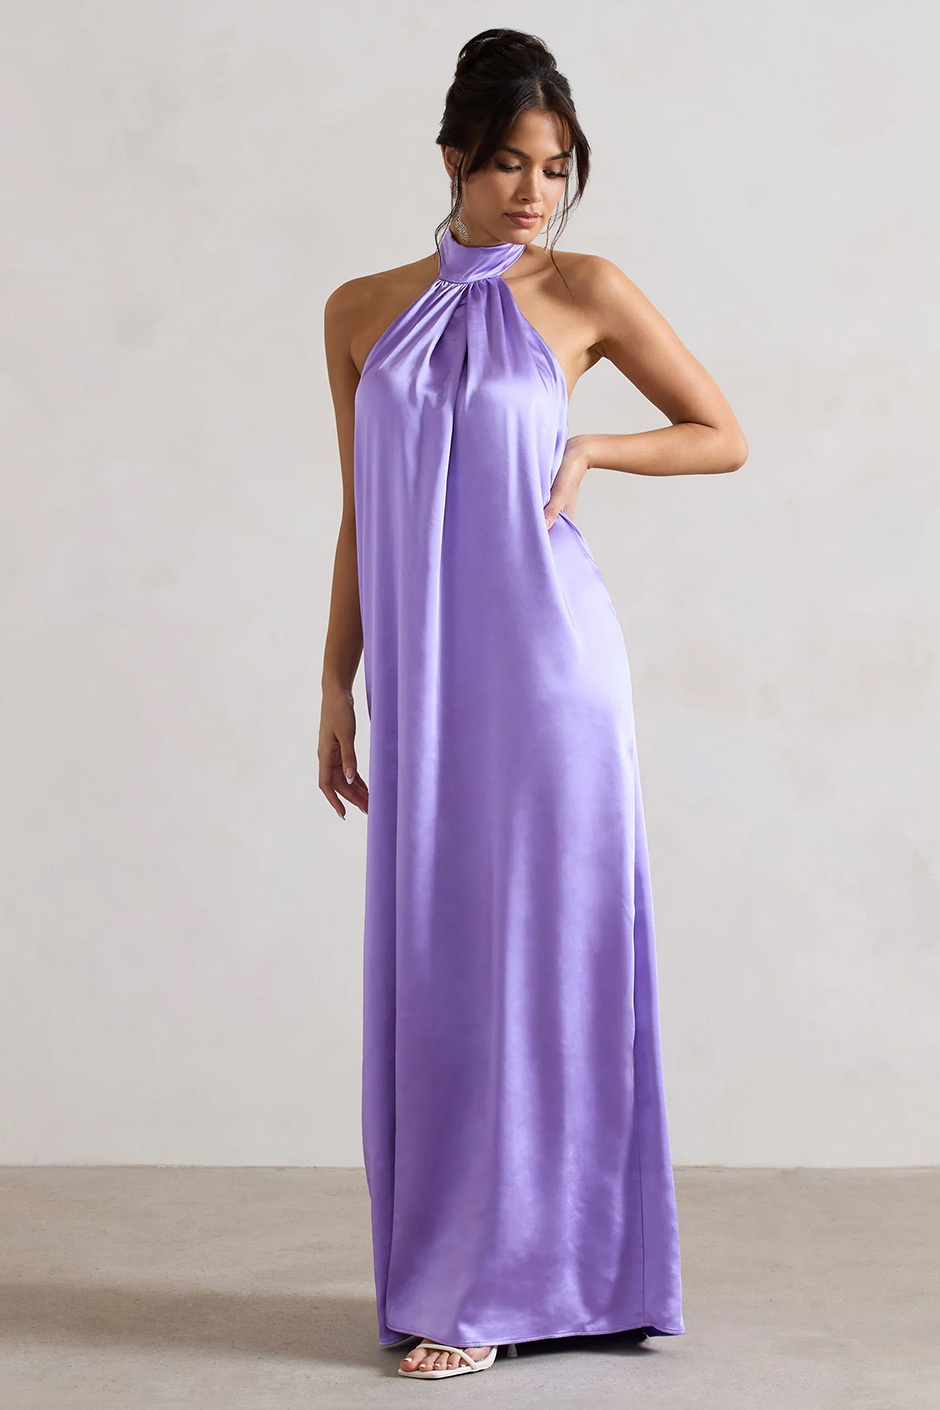 spring bridesmaid dress from Club L - purple satin maxi dress with halter tie neck